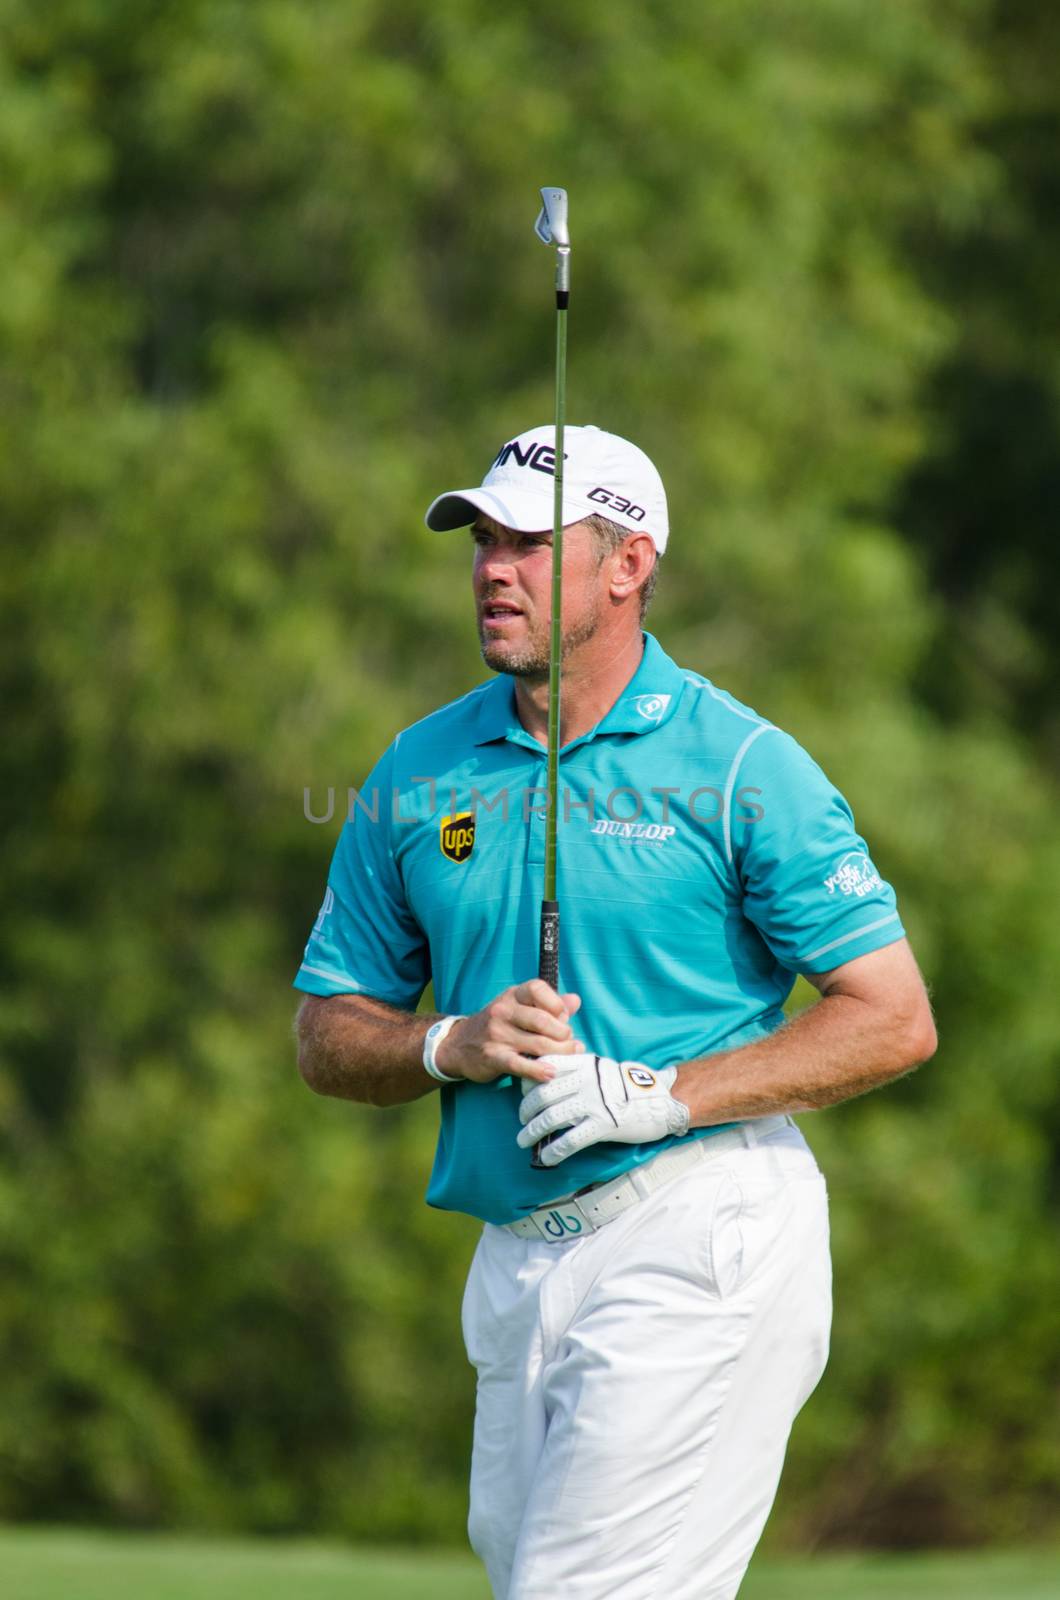 Lee Westwood in Thailand Golf Championship 2015 by chatchai